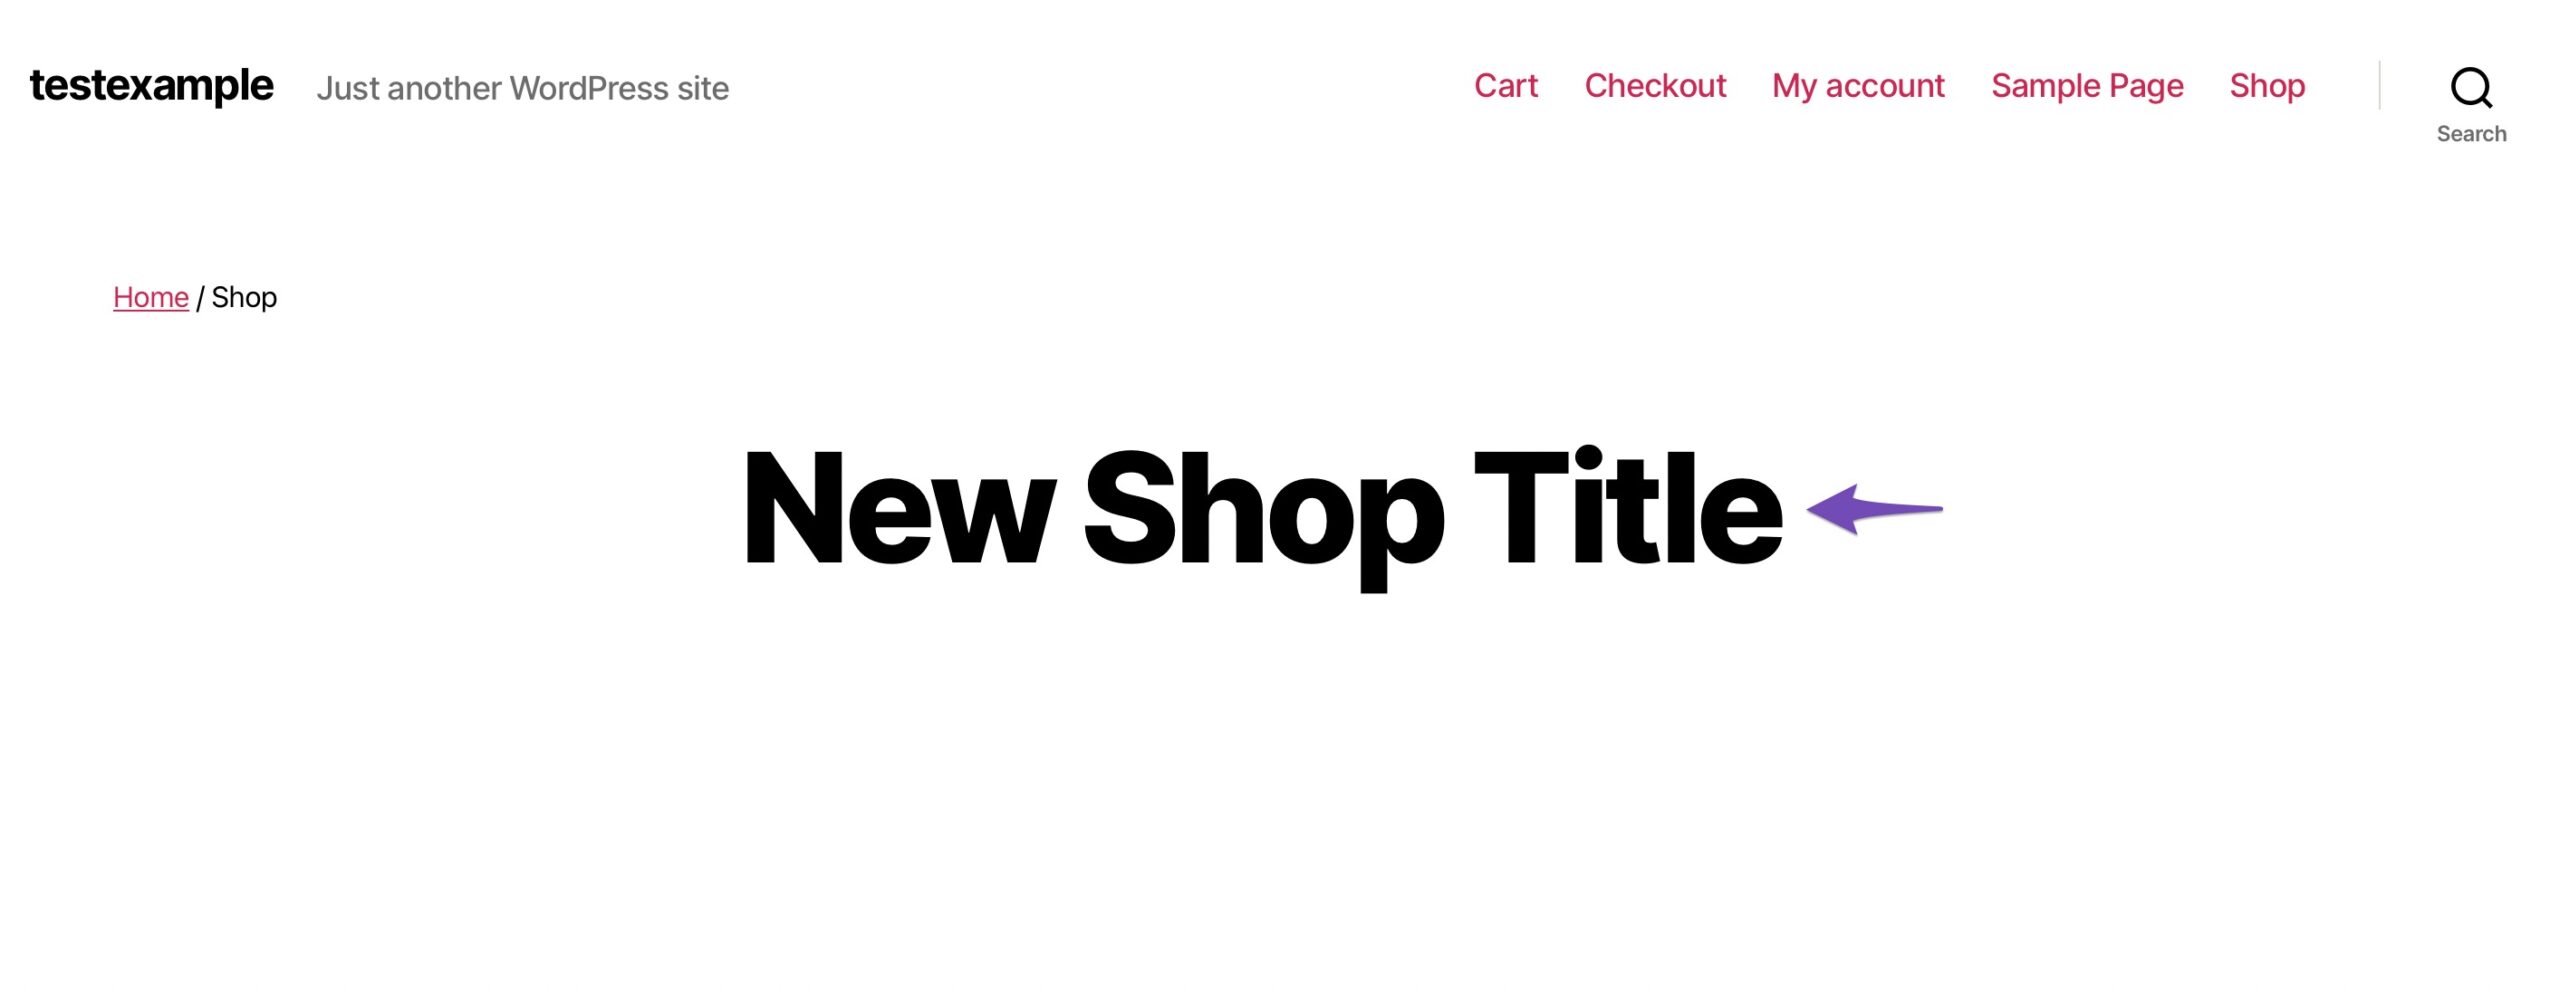 Shop Page Title Changed Using Code